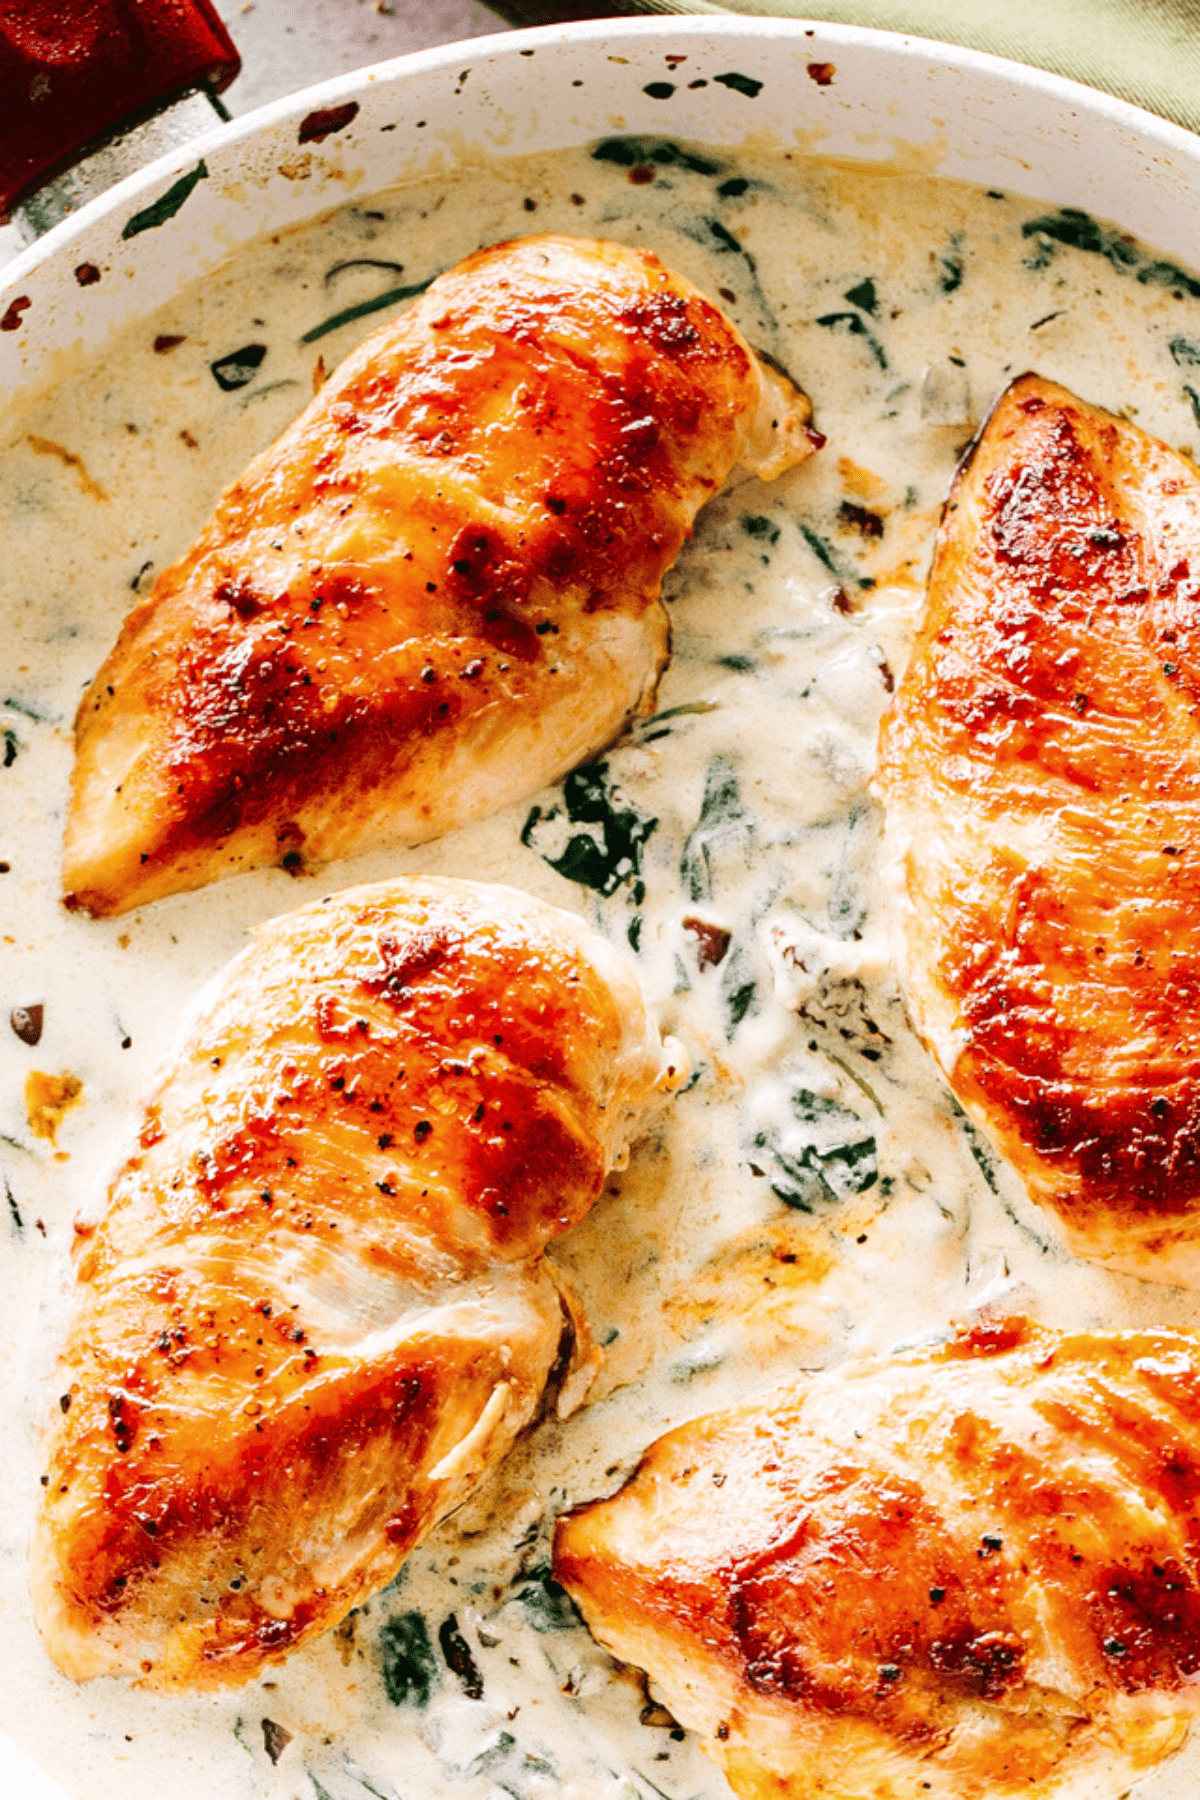 Seared chicken on the creamy sauce.